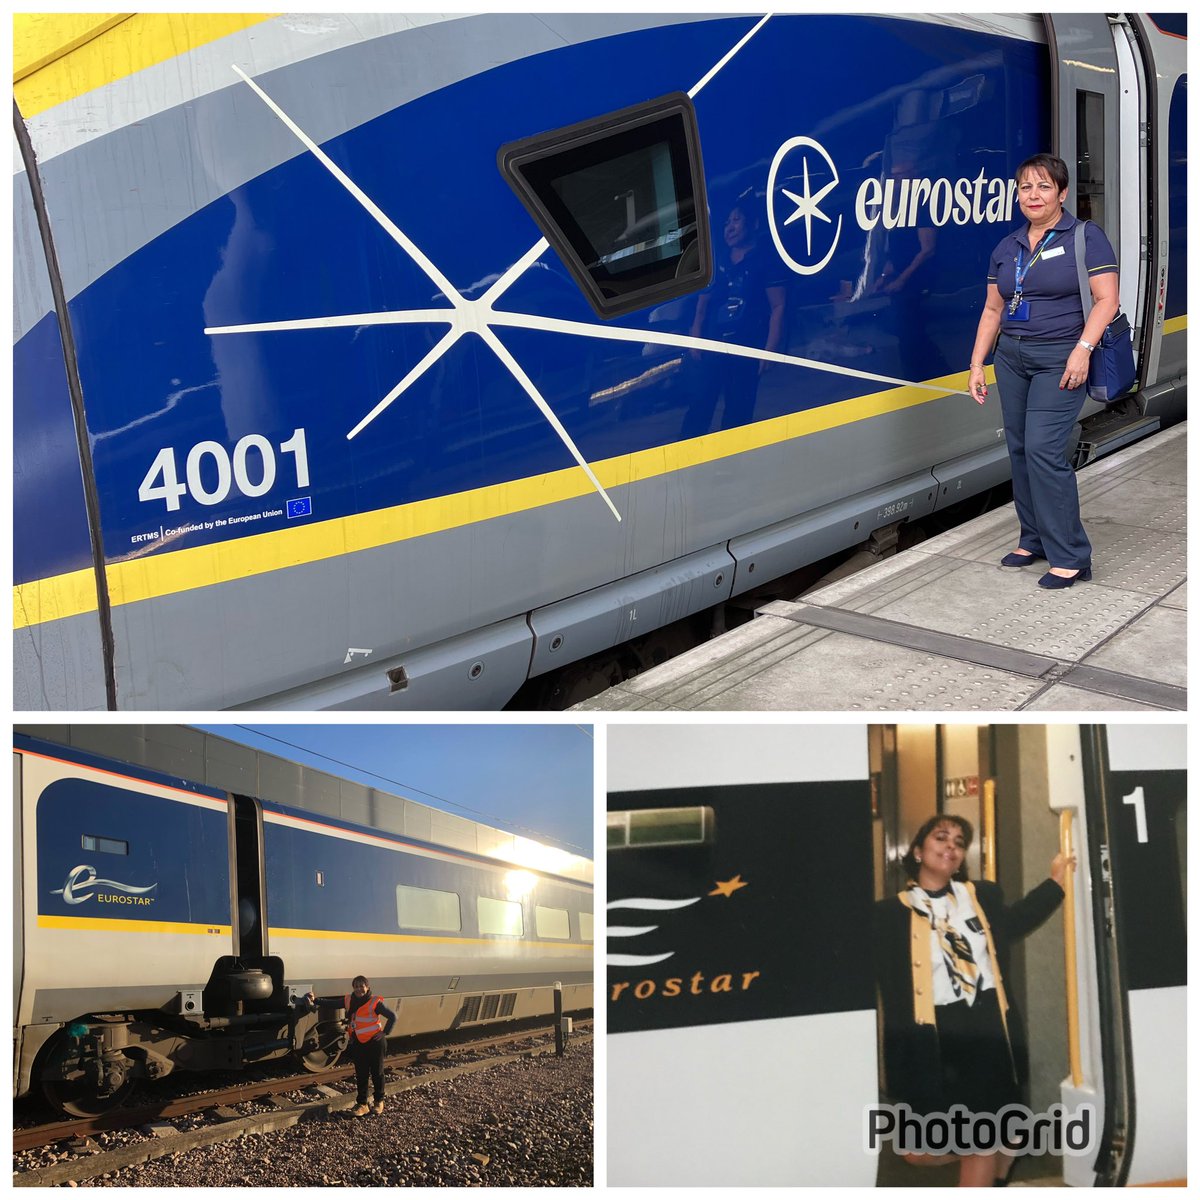 Almost 3 decades of high speed trains ! #eurostar #SNCF #trains #nmbs #thalys #TrainsNotPlanes #ES9048